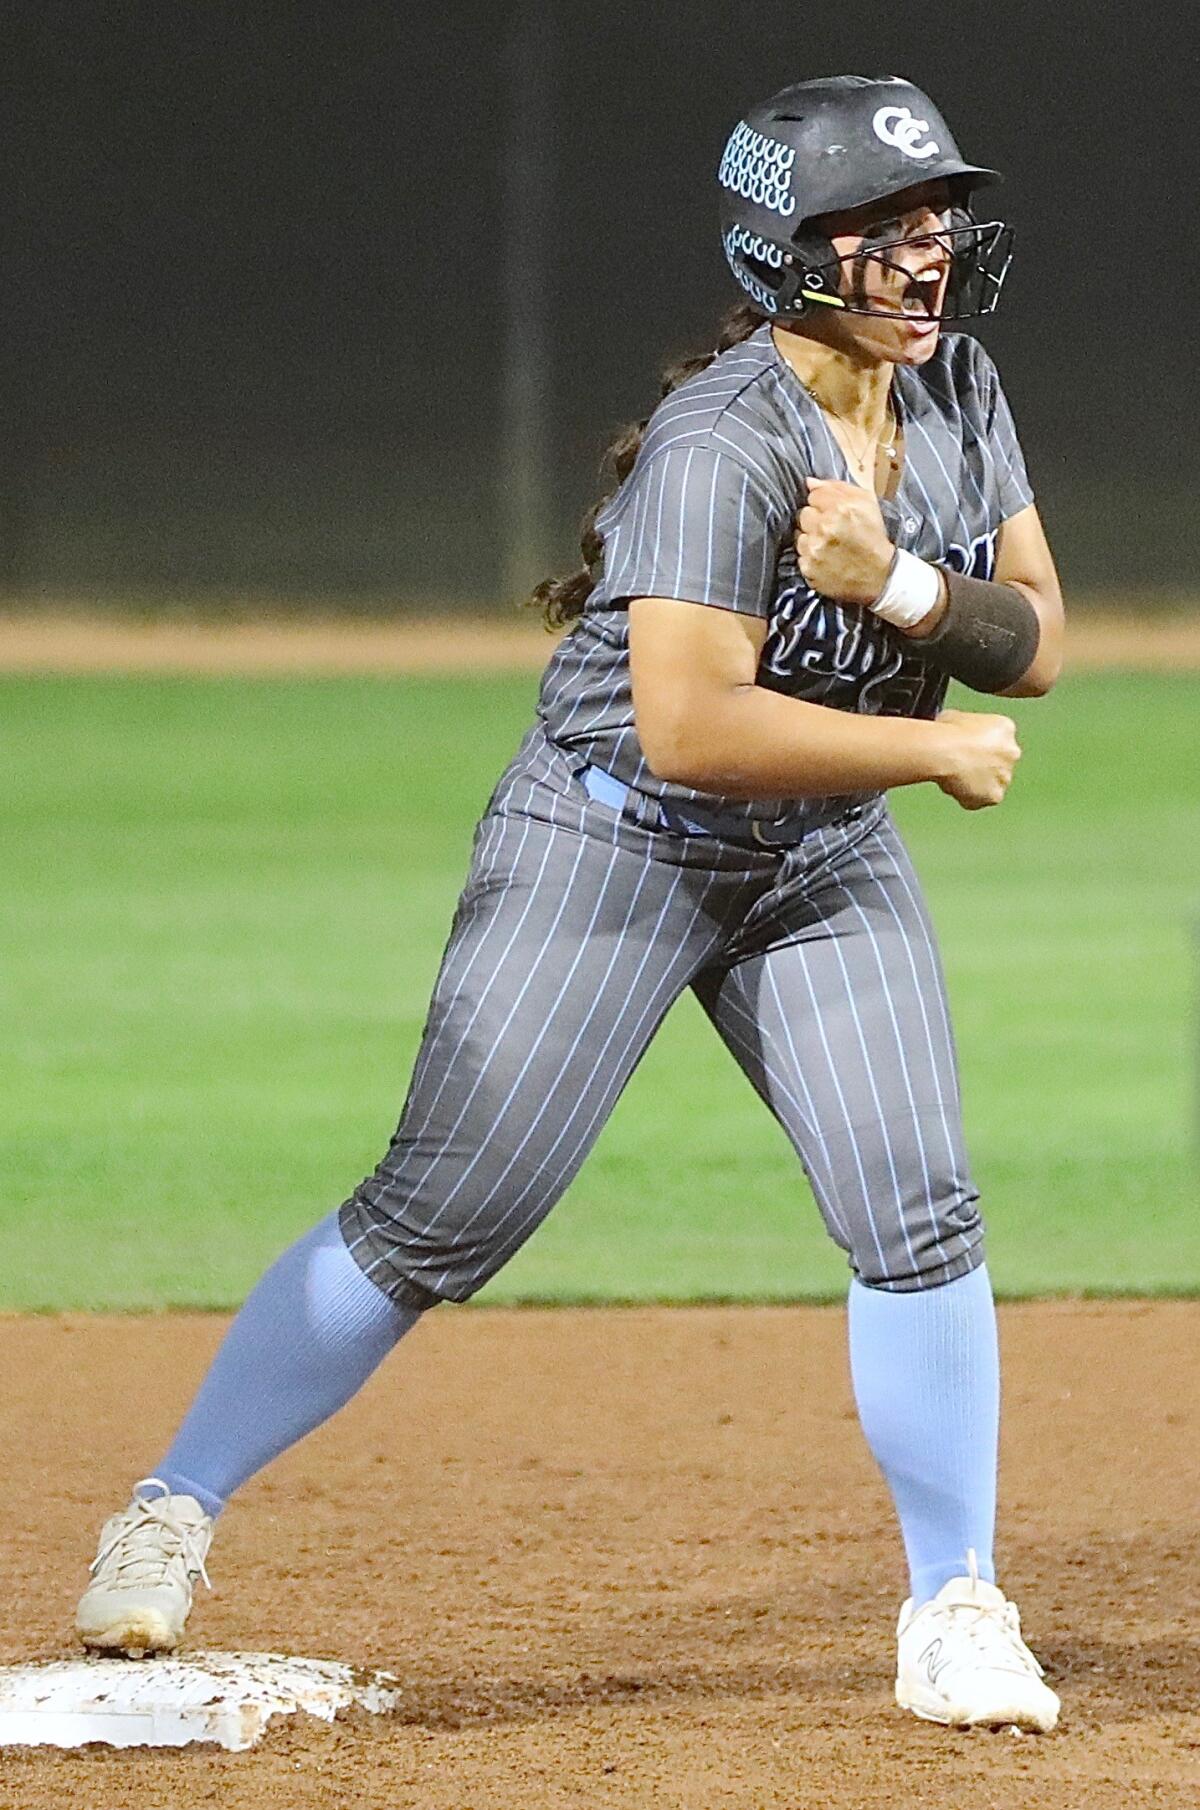 Carson's Alana Langford celebrates after a double for the game’s first hit in the seventh inning against Granada Hills.